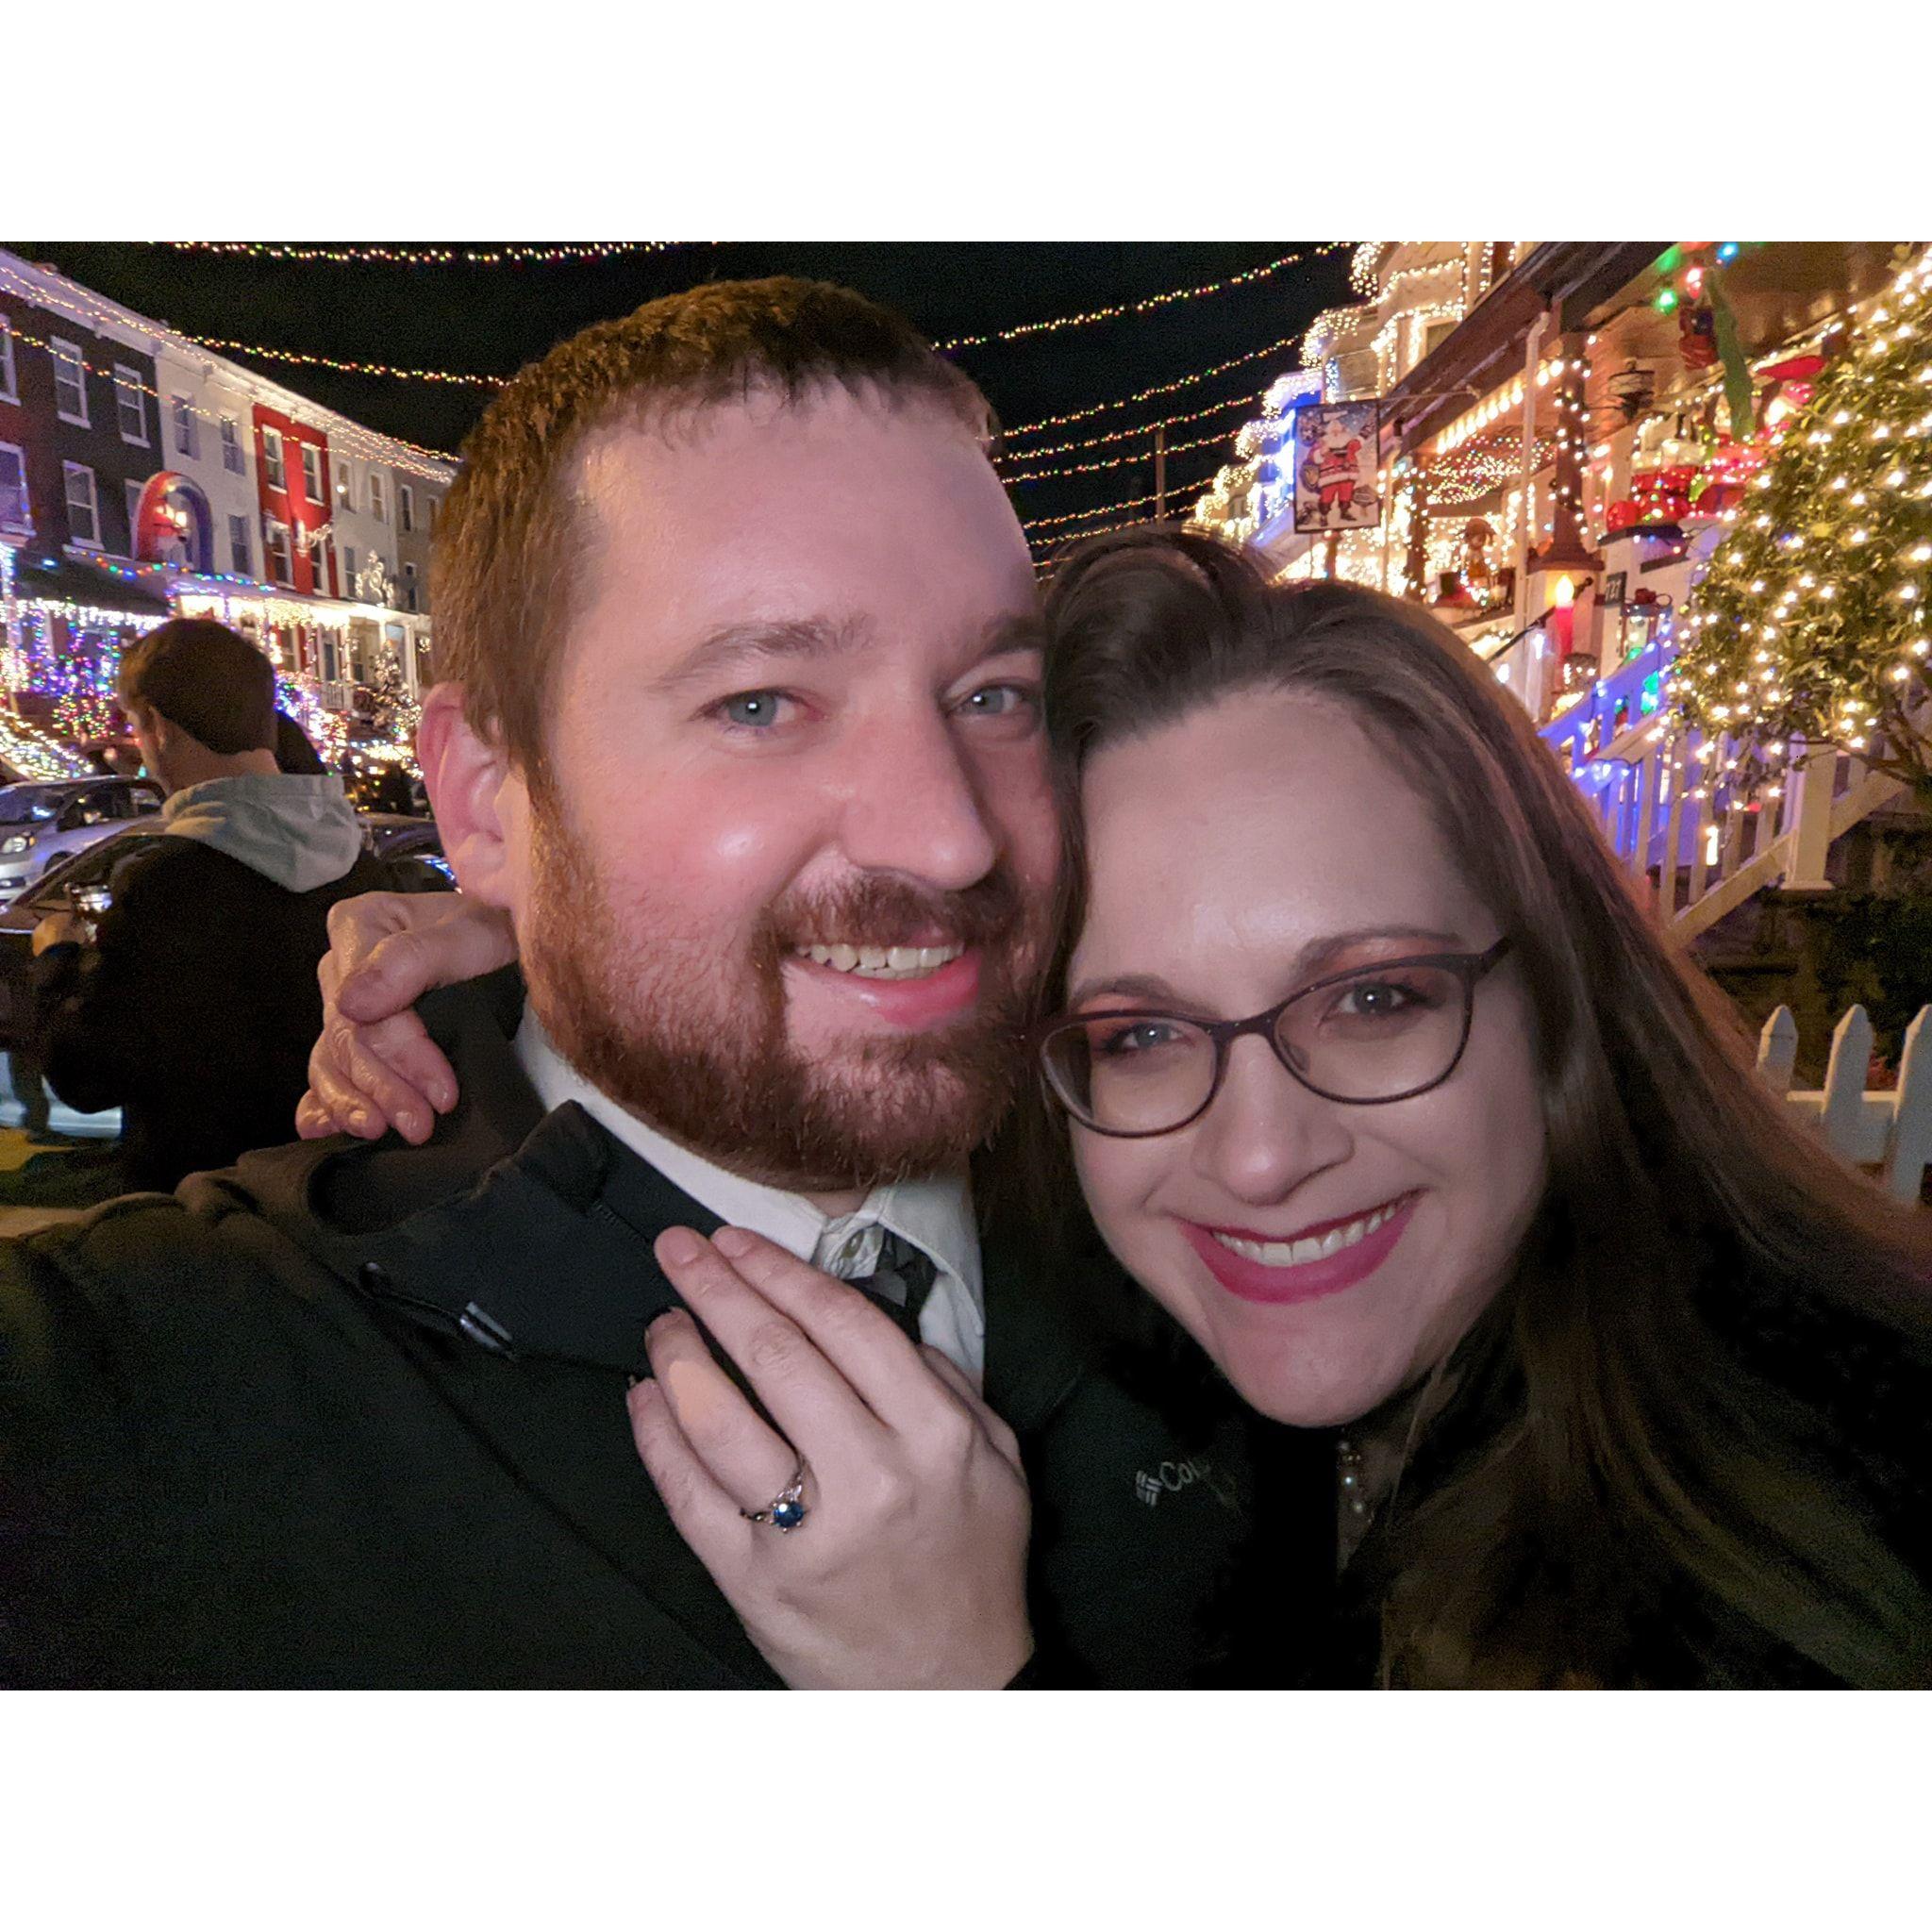 Engagement at Miracle on 34th Street, Baltimore!